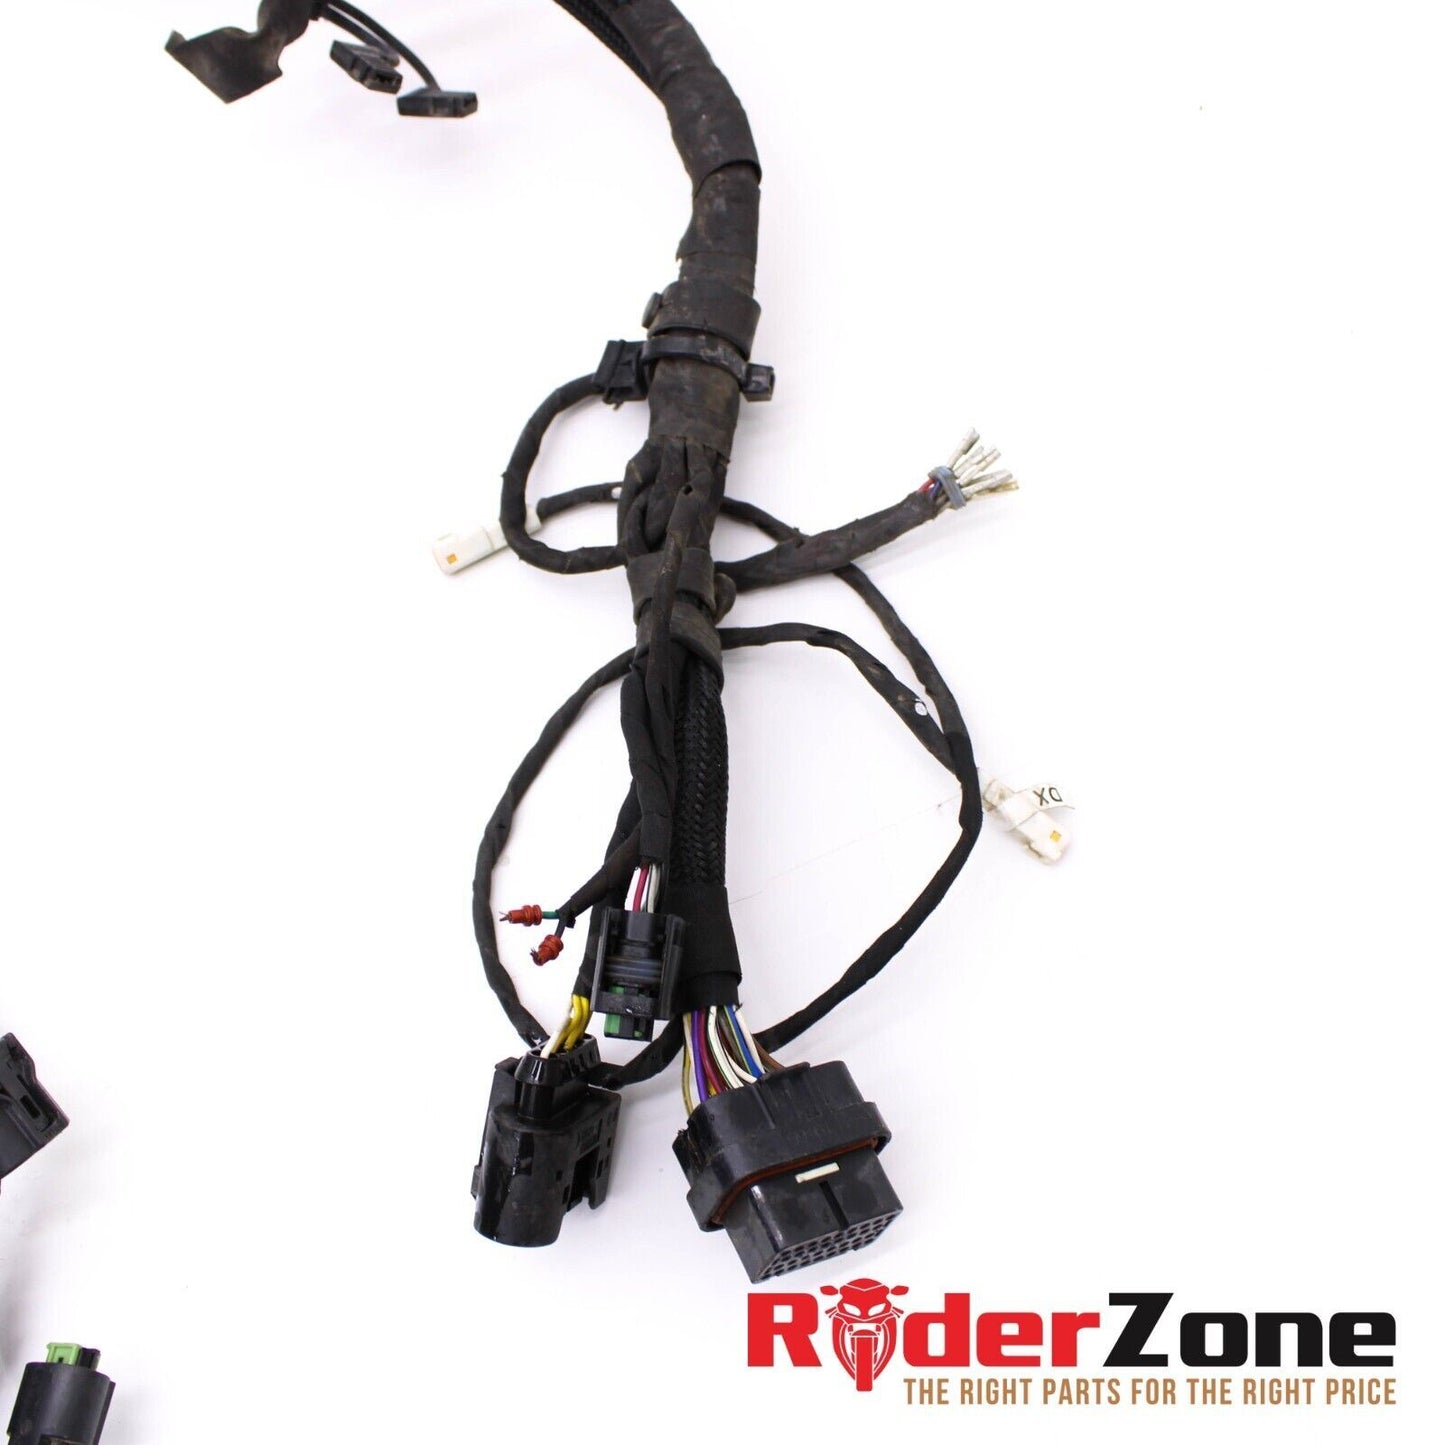 2020 - 2022 DUCATI PANIGALE V2 WIRING HARNESS MAIN WIRES ELECTRICAL *NO CUTS* OE